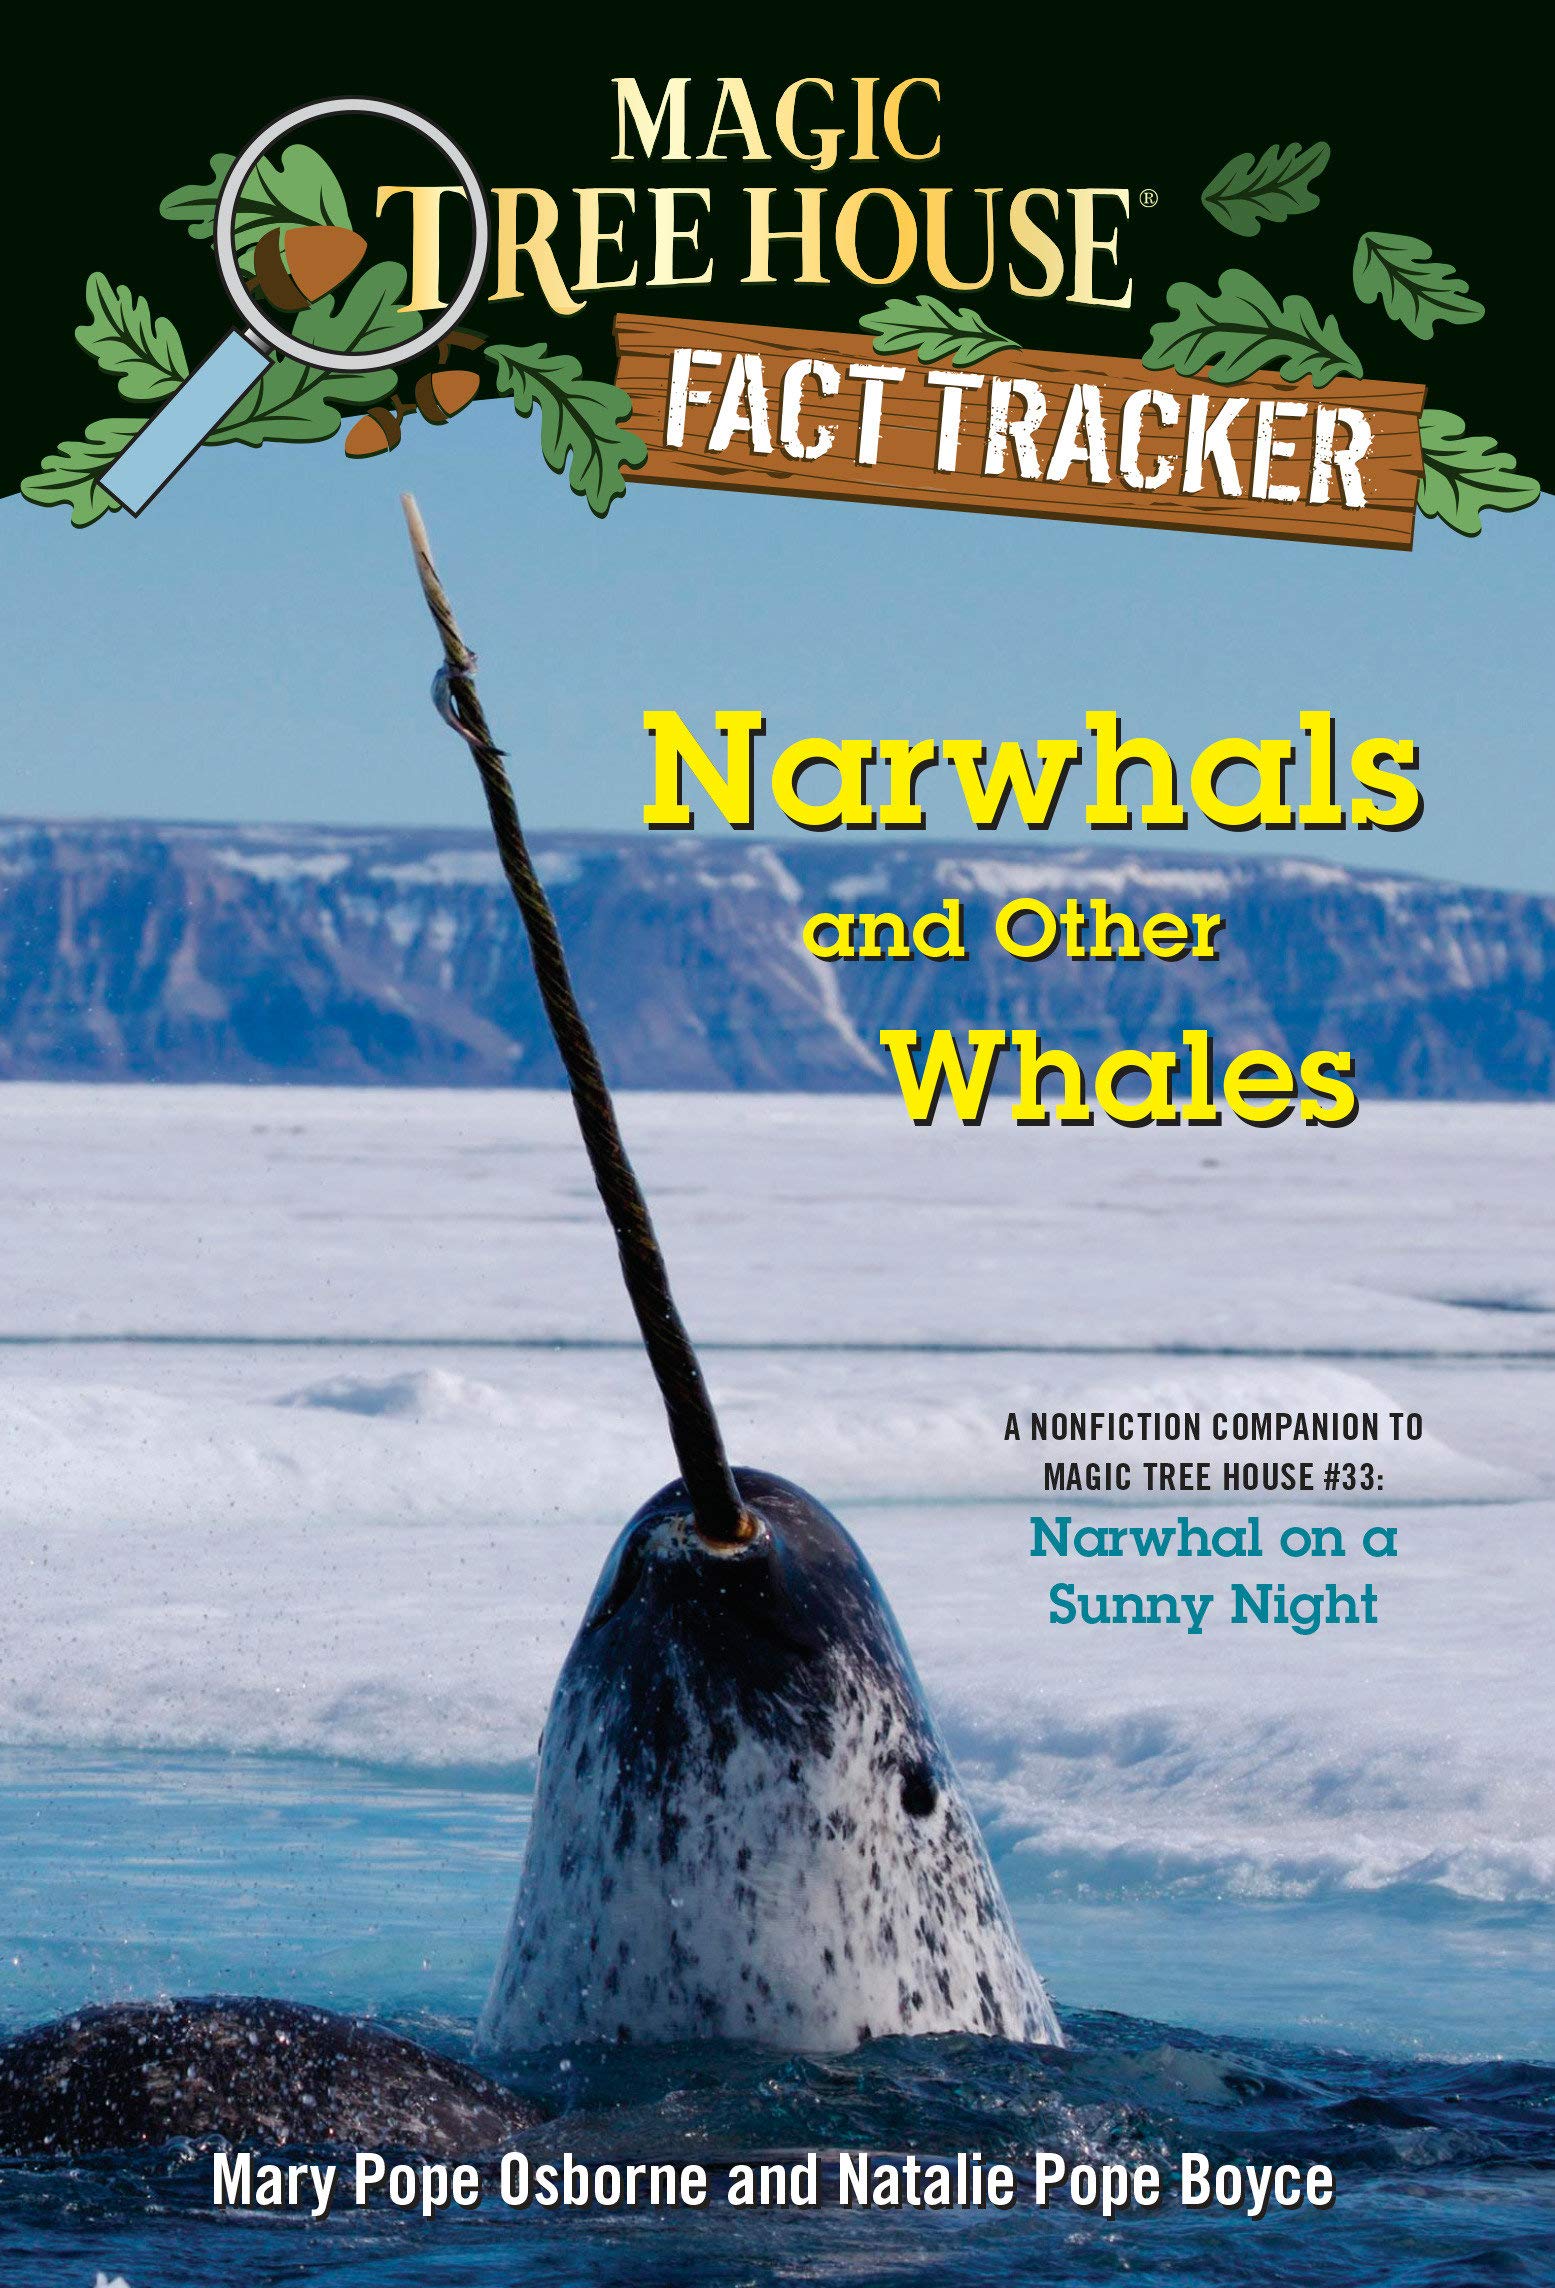 (MTH FACT TRACKER #42)Narwhals and Other Whales